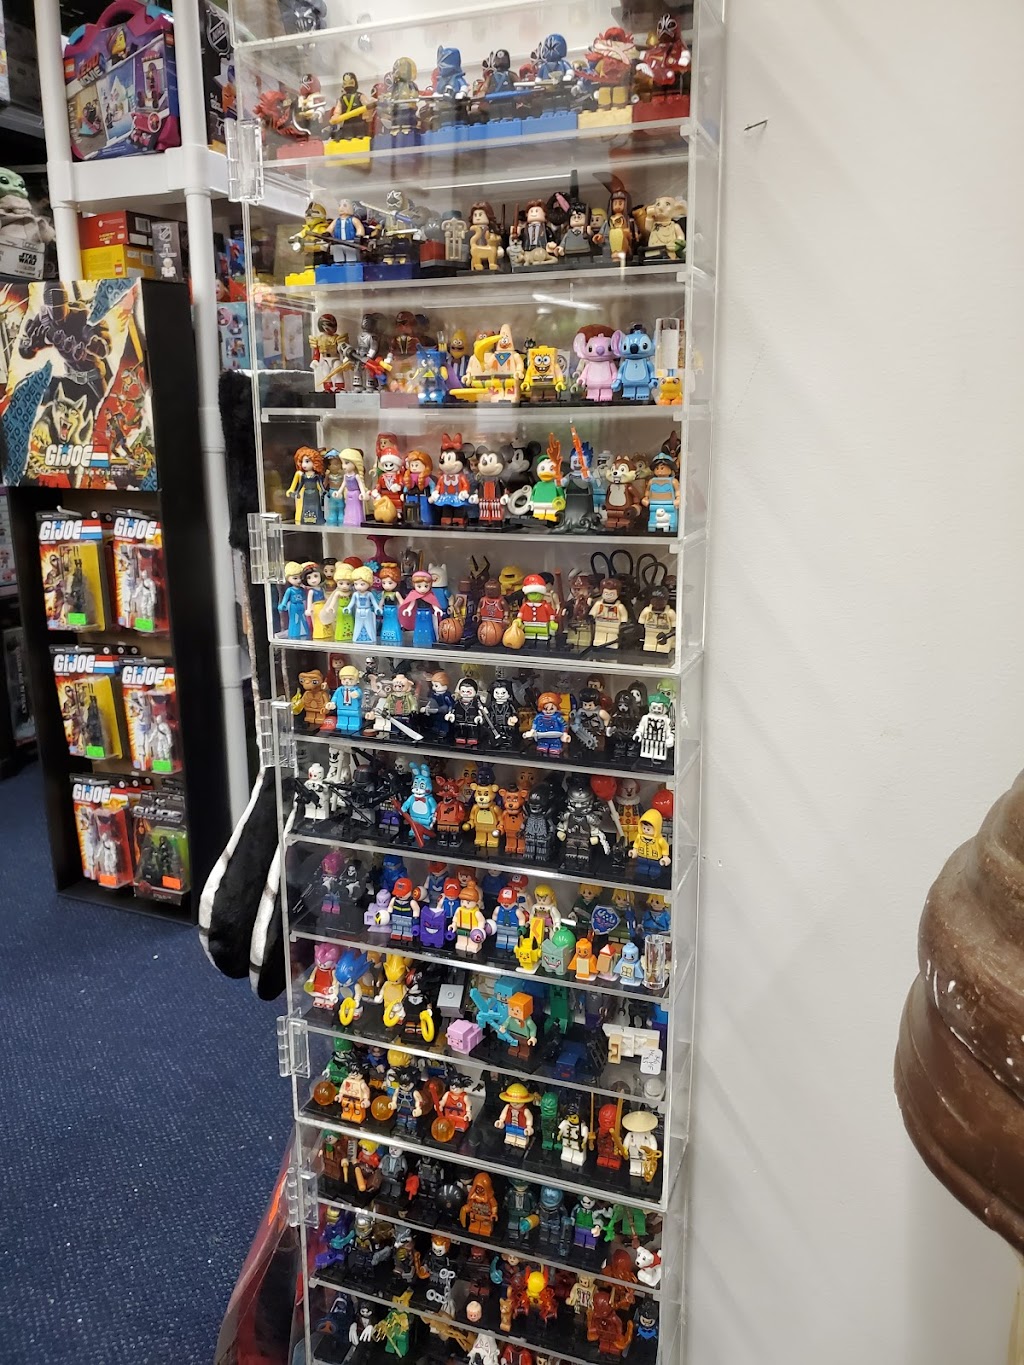 Mikes Toys and Collectibles | 1310 Boardwalk, Ocean City, NJ 08226 | Phone: (609) 553-7216